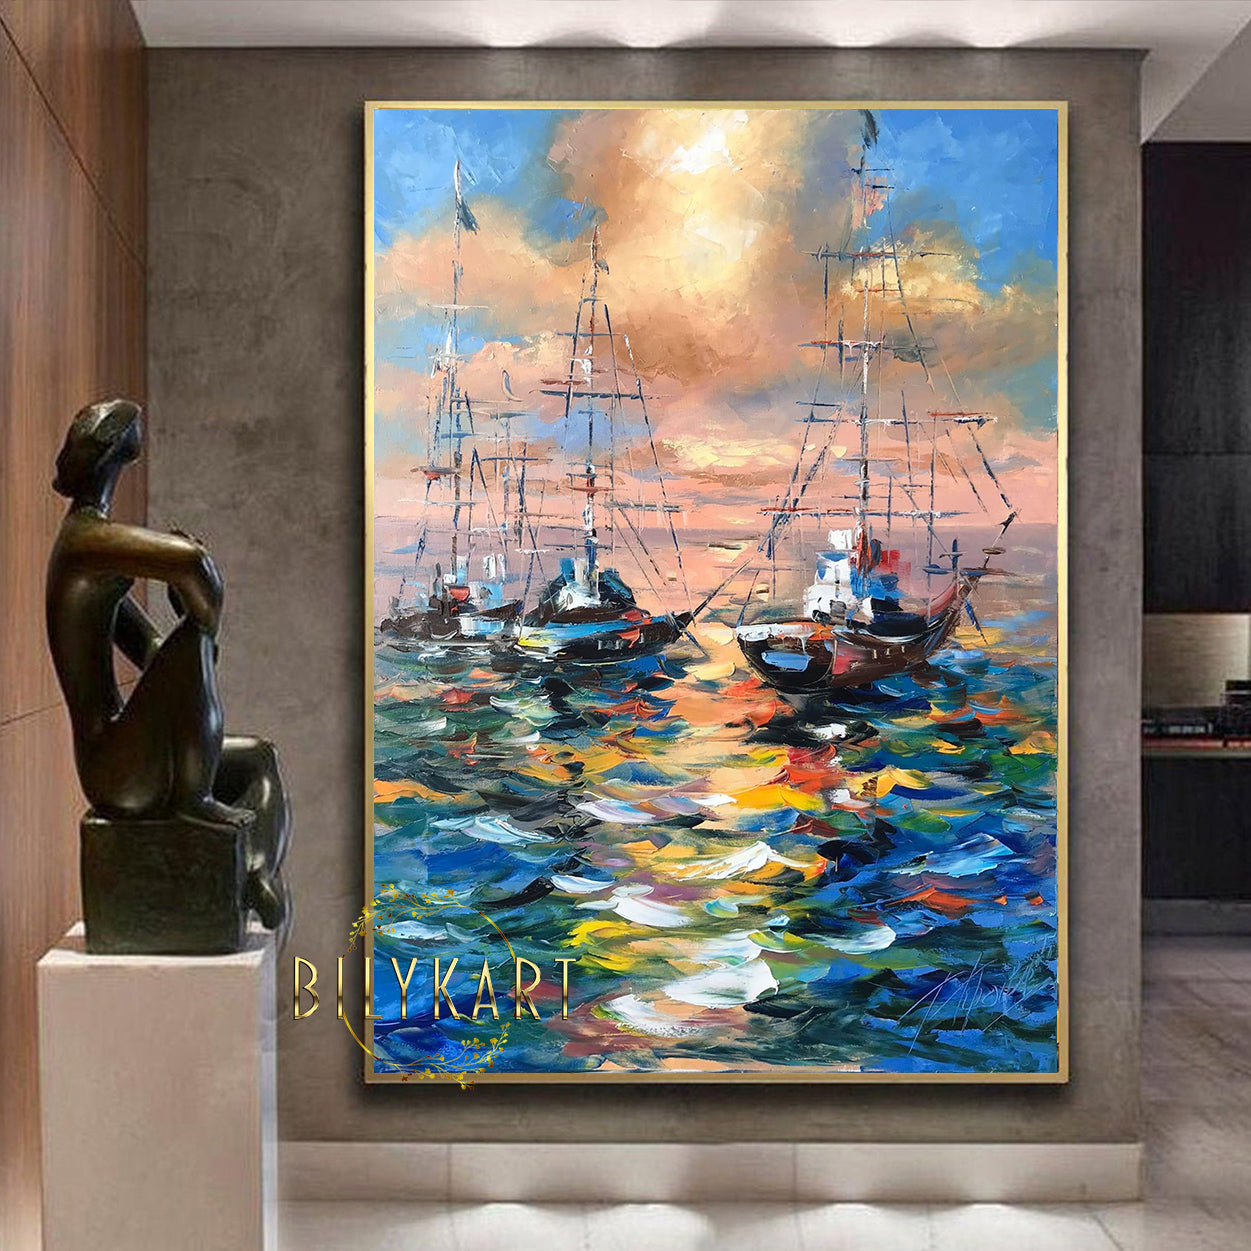 Large Boat Paintings for Sale Abstract Yacht Art Boat at Sunset Painting on Canvas Large Sunset Sailboat Framed Art